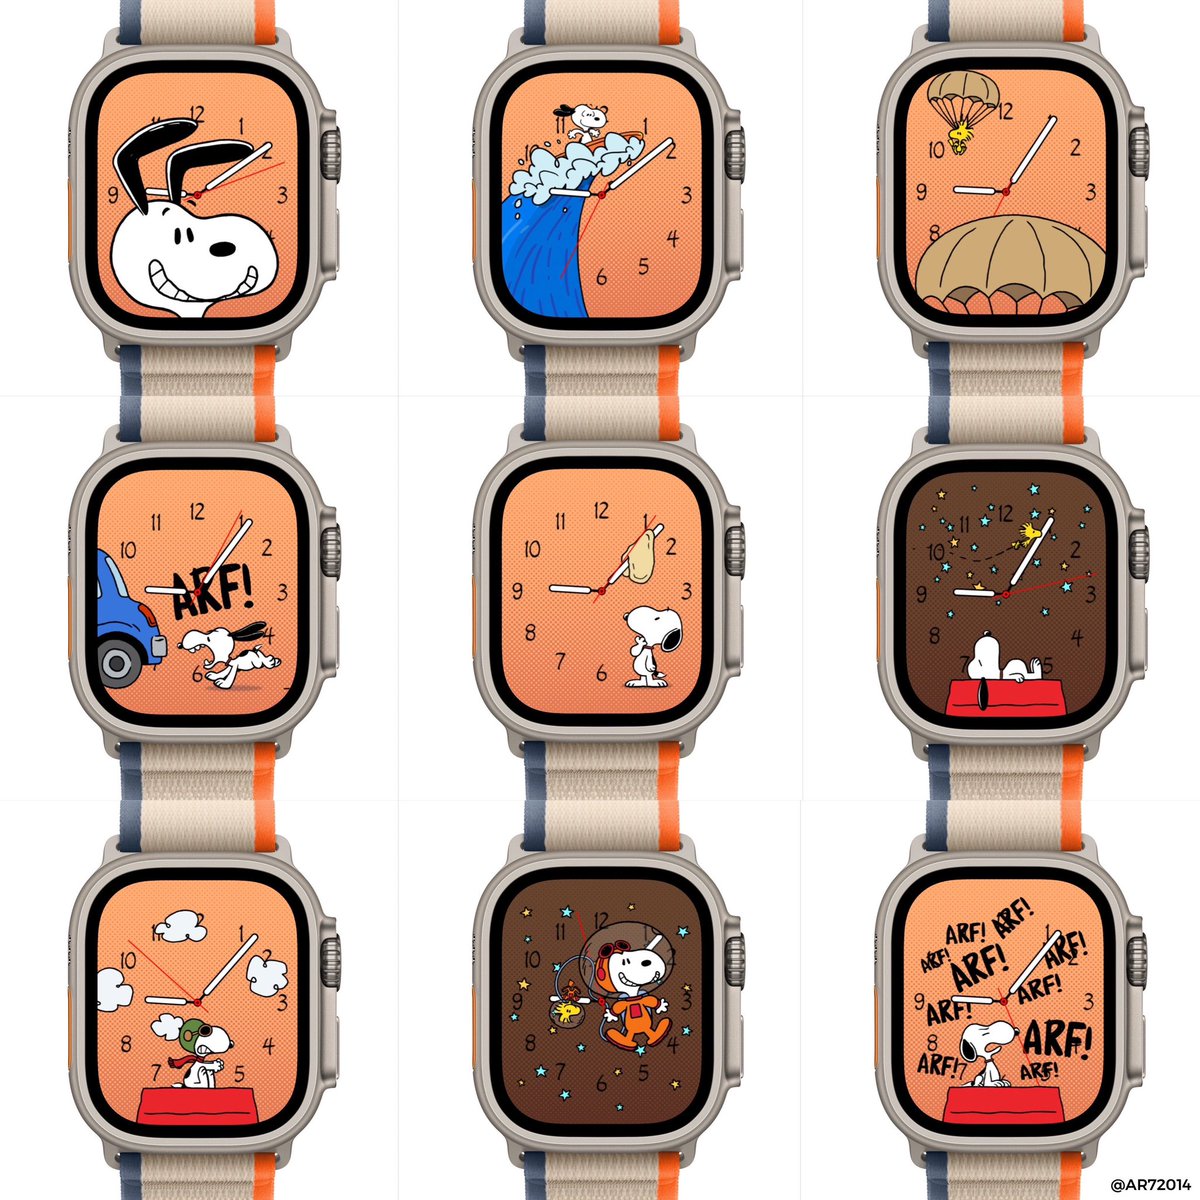 #Apple #AppleWatch #AppleWatchUltra #AppleWatchUltra2 #snoopy #watchOS10 #watchface #watchfaces 

The amount of animations this Watch face has is incredible!

Would you like more animated watch faces in the future ?